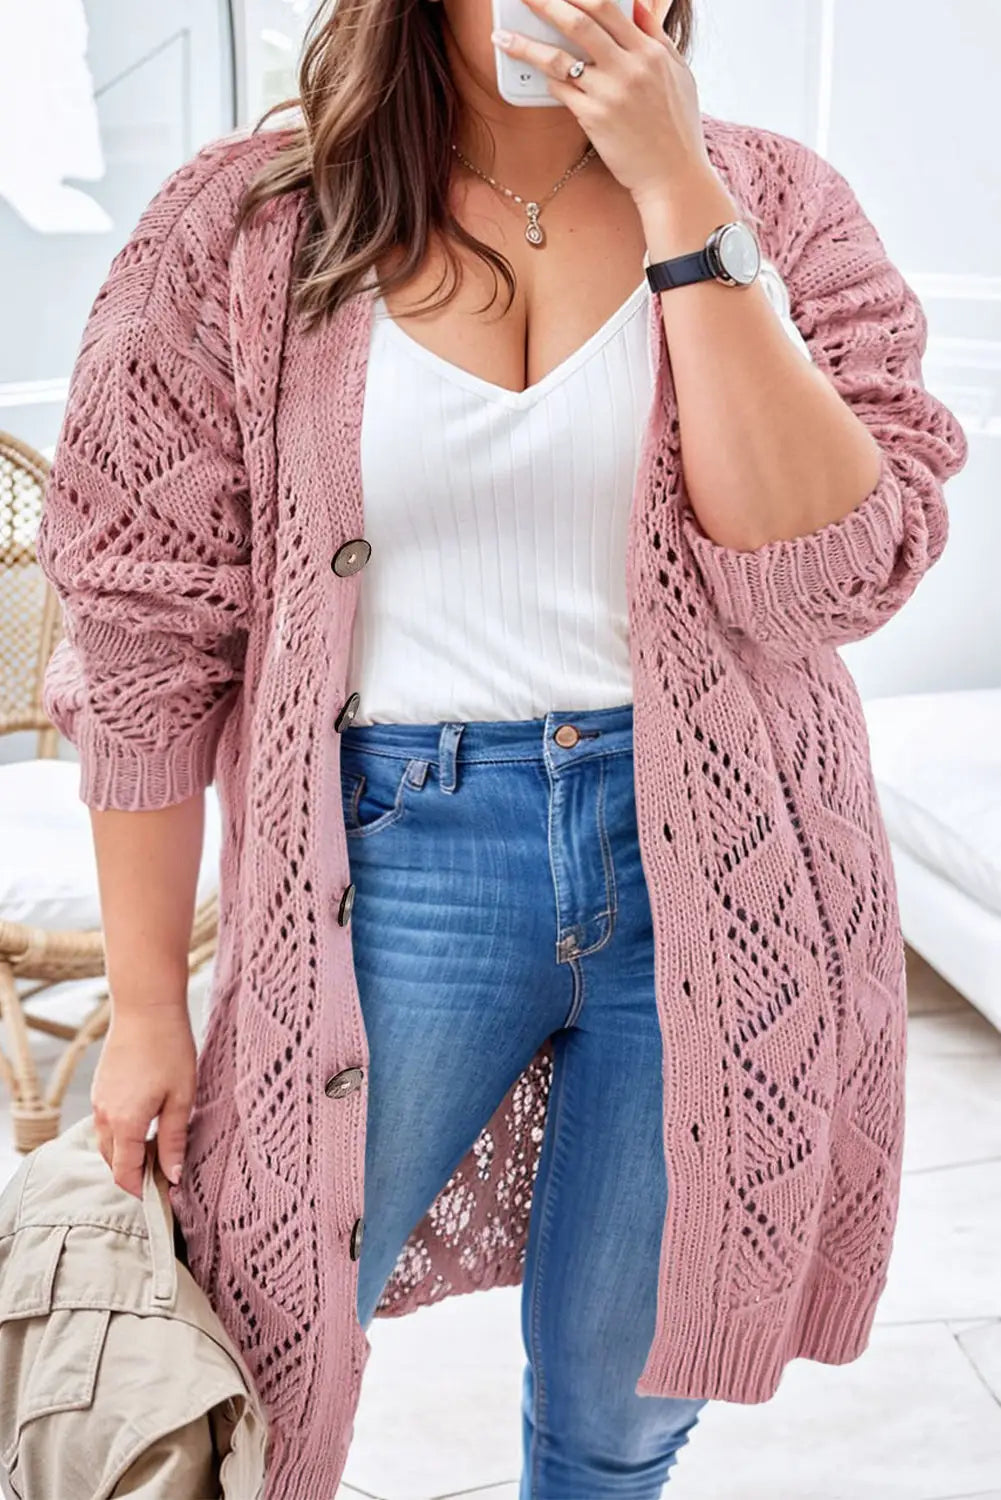 Khaki hollow-out openwork knit cardigan - pink / 1x / 60% cotton + 40% acrylic - sweaters & cardigans